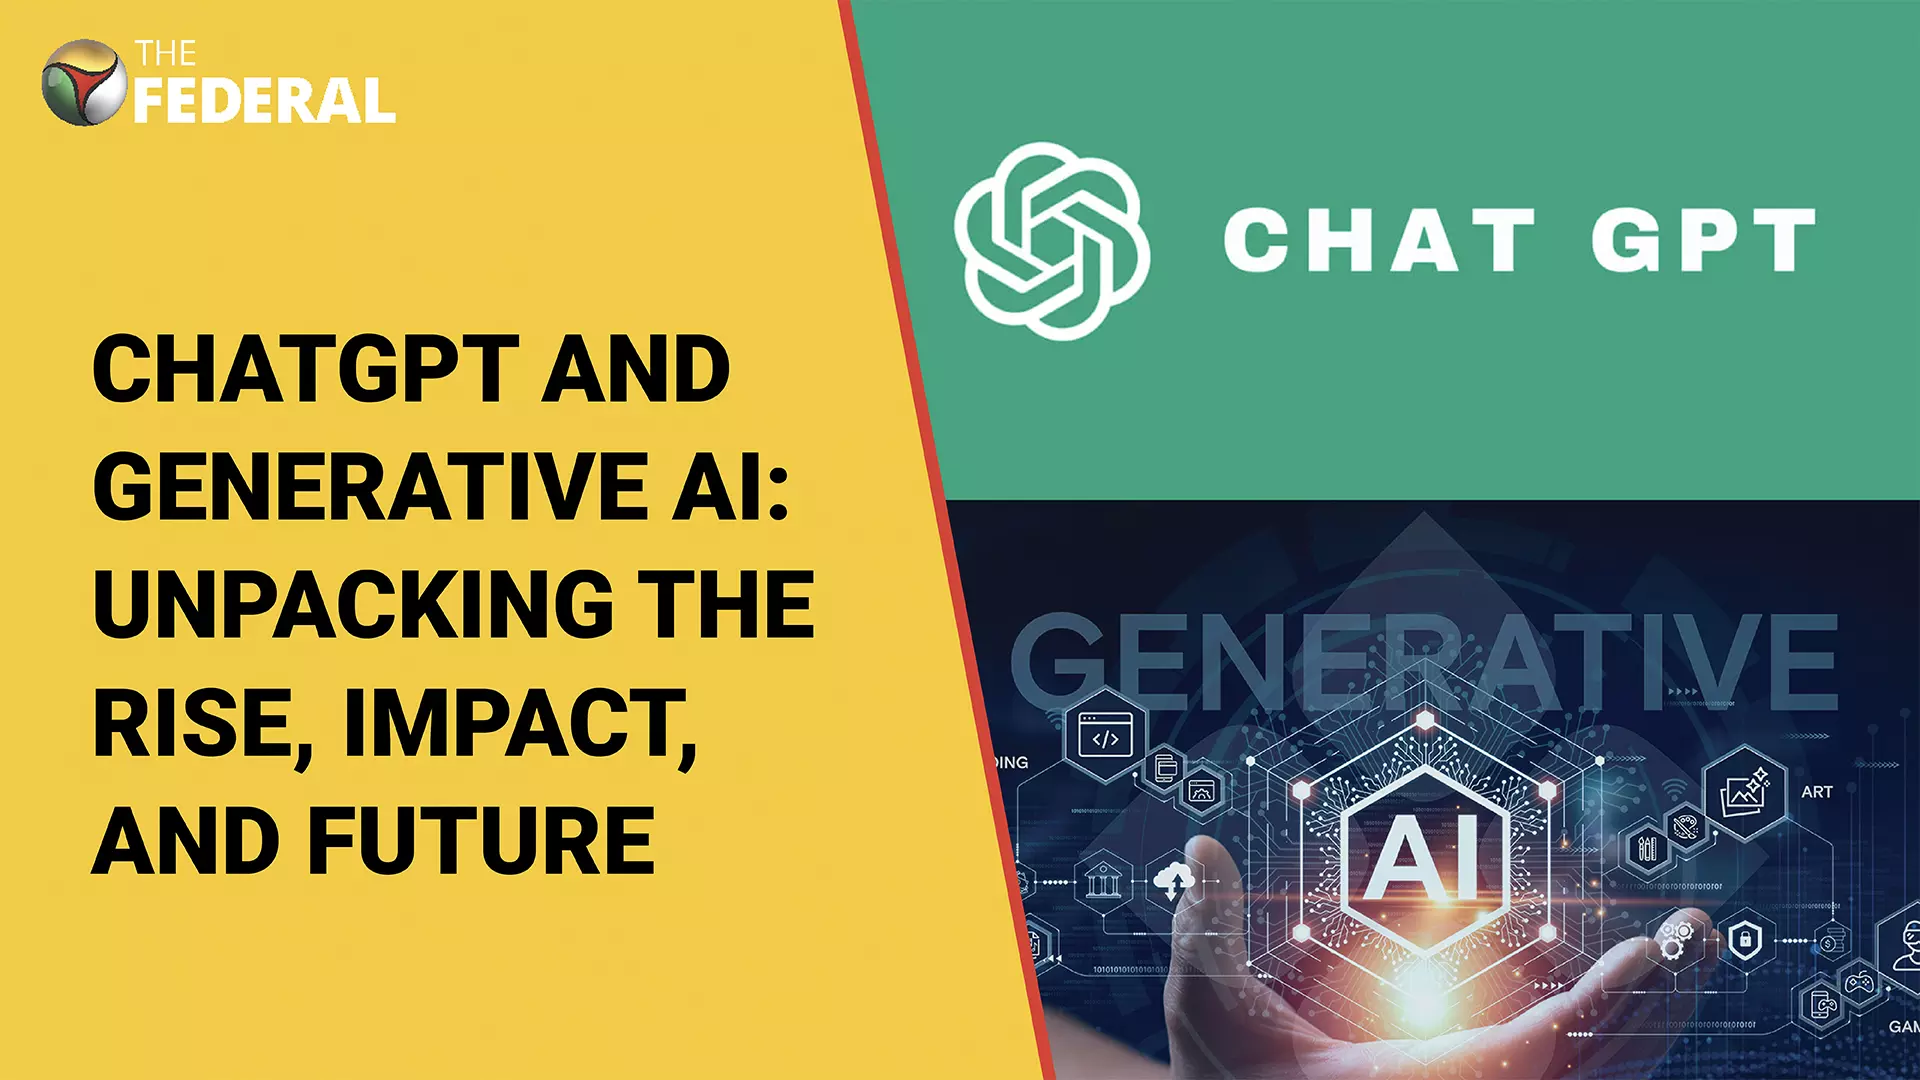 ChatGPT and generative AI: Unpacking the rise, impact, and future